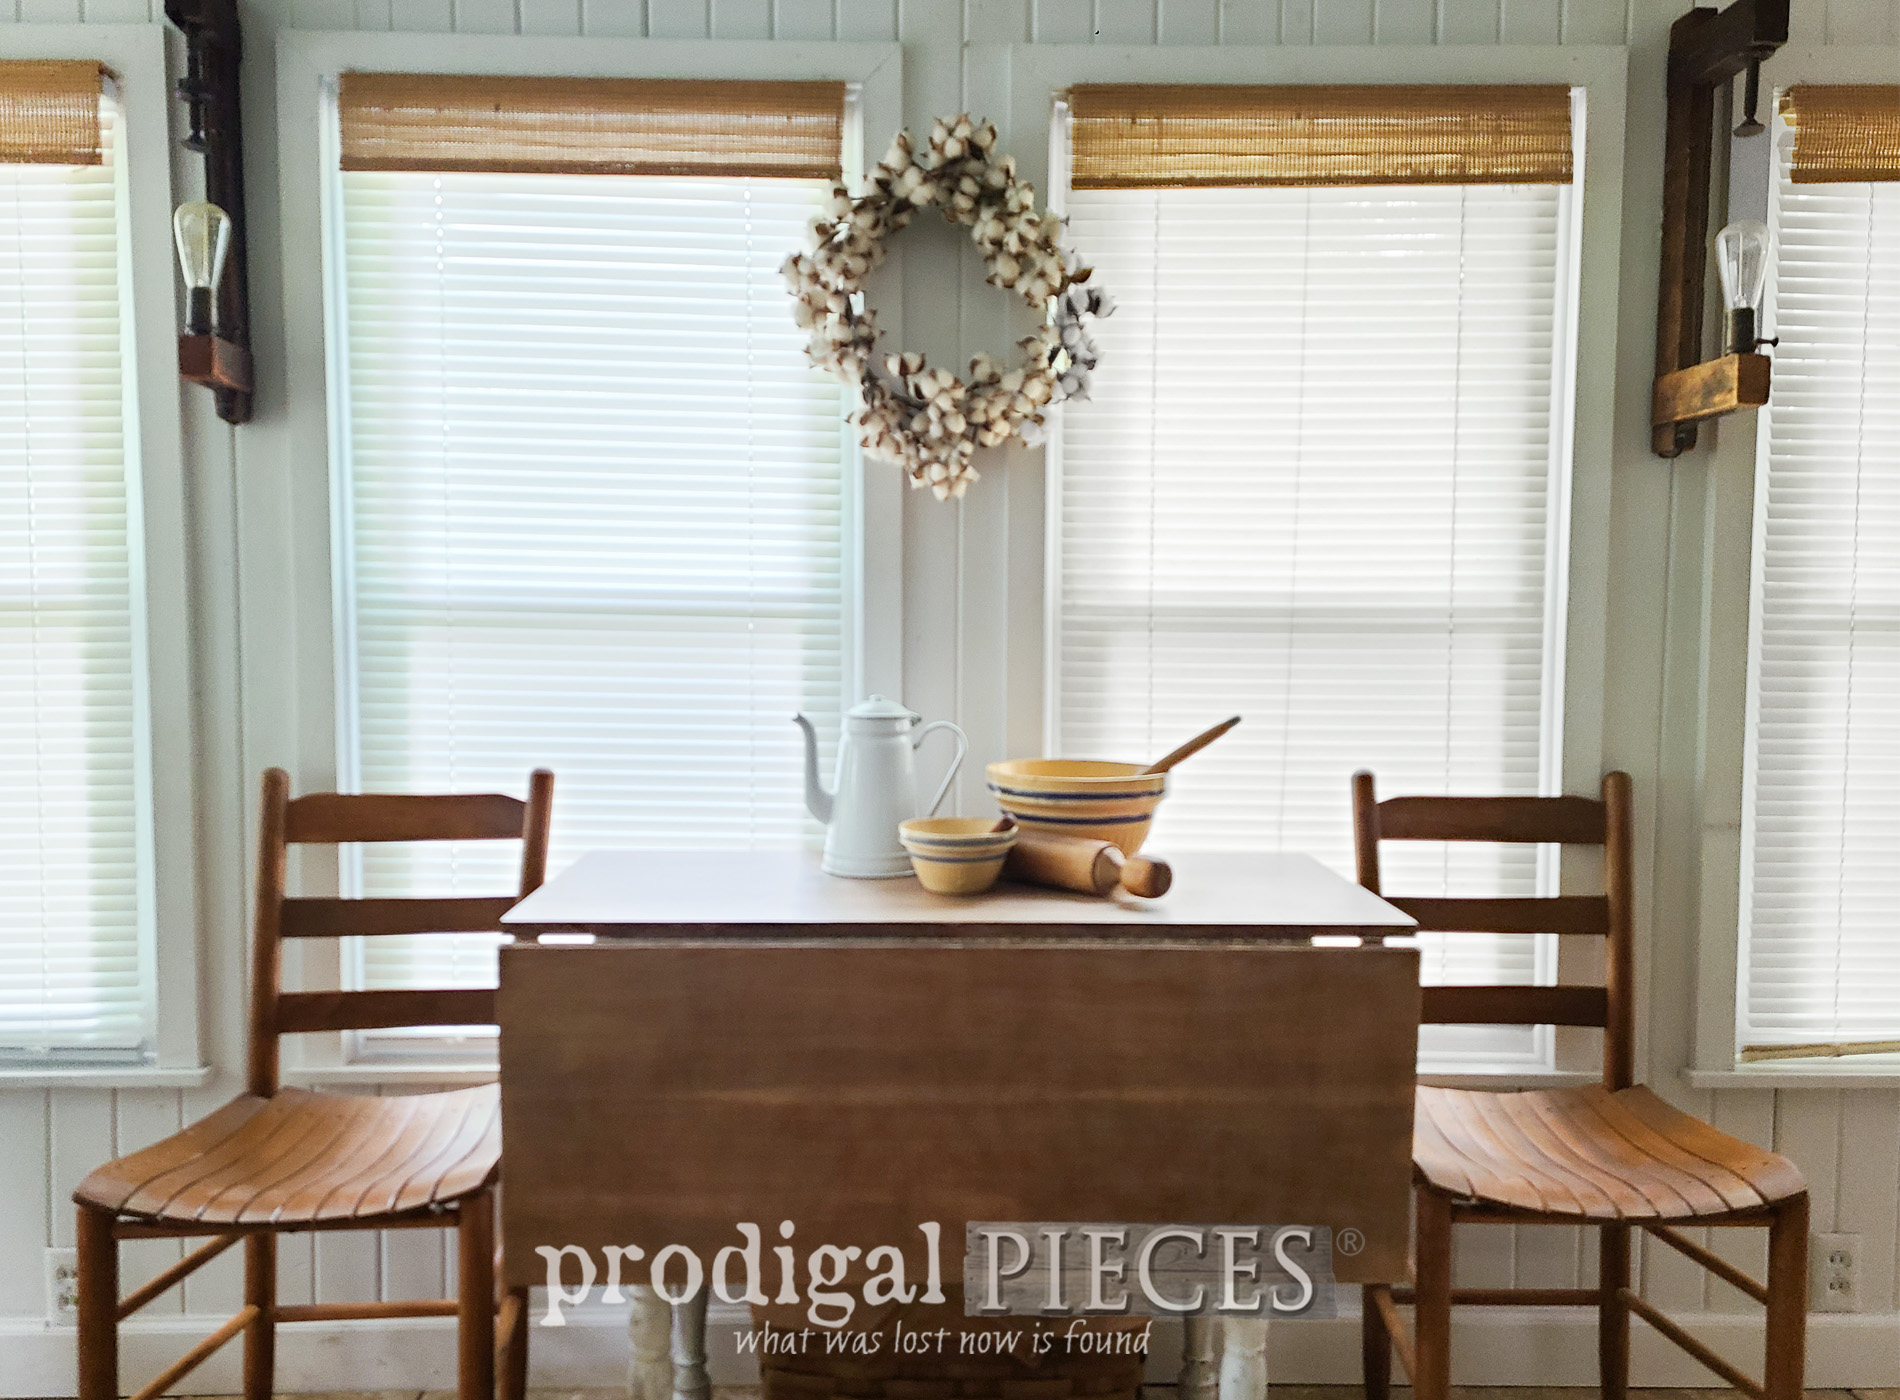 Featured Drop-Leaf Dining Table Makeover by Larissa of Prodigal Pieces | prodigalpieces.com #prodigalpieces #farmhouse #furniture #diy #makeover